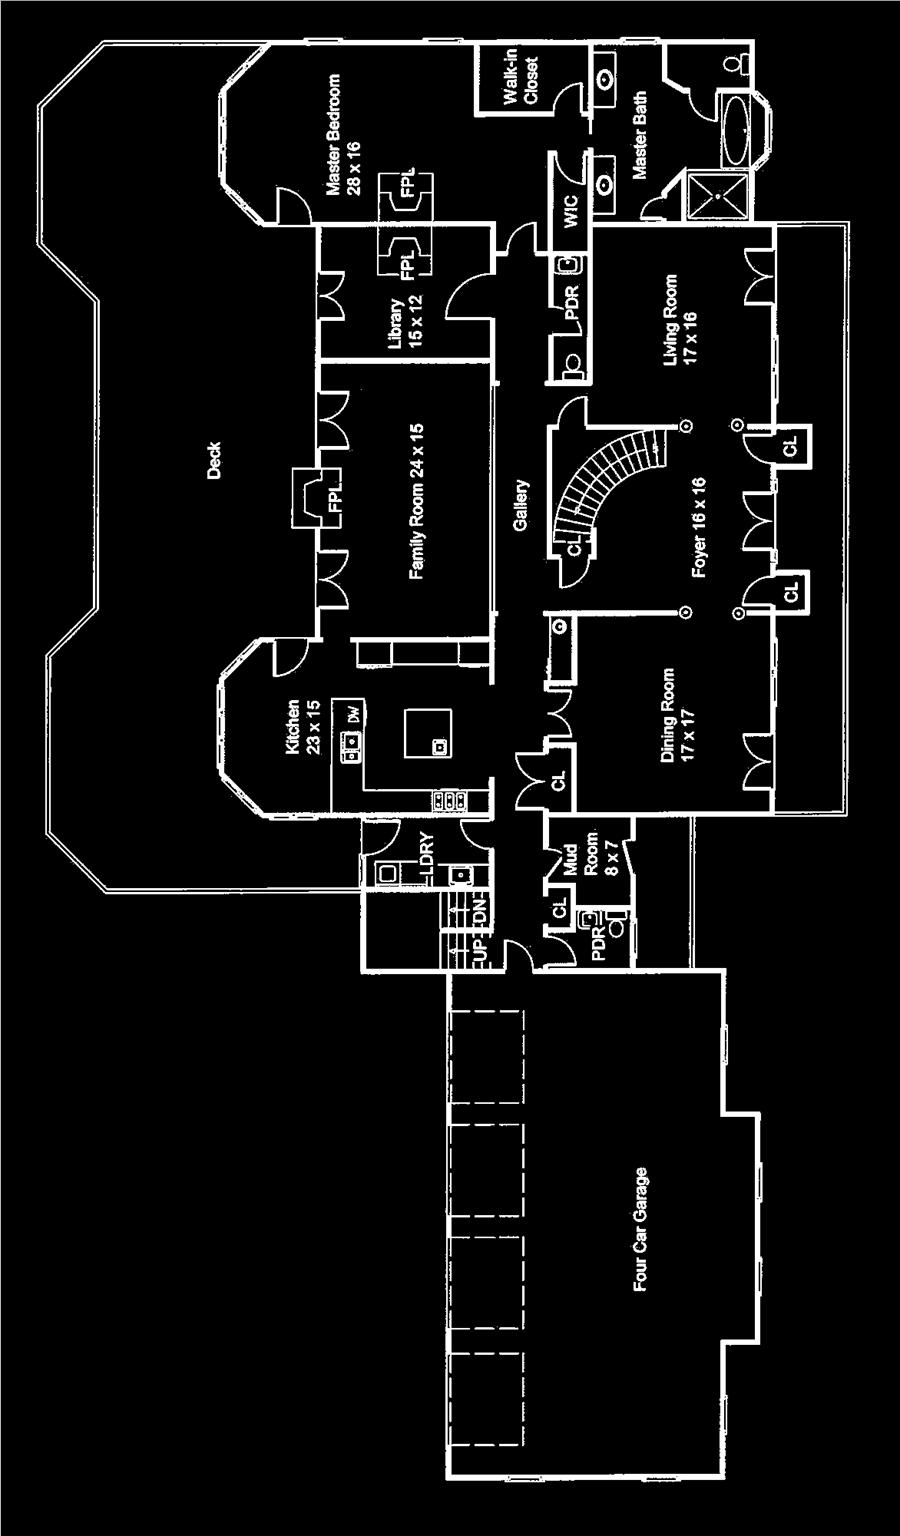 Floor Plans: Main Level Floor plan is for illustration purposes only.